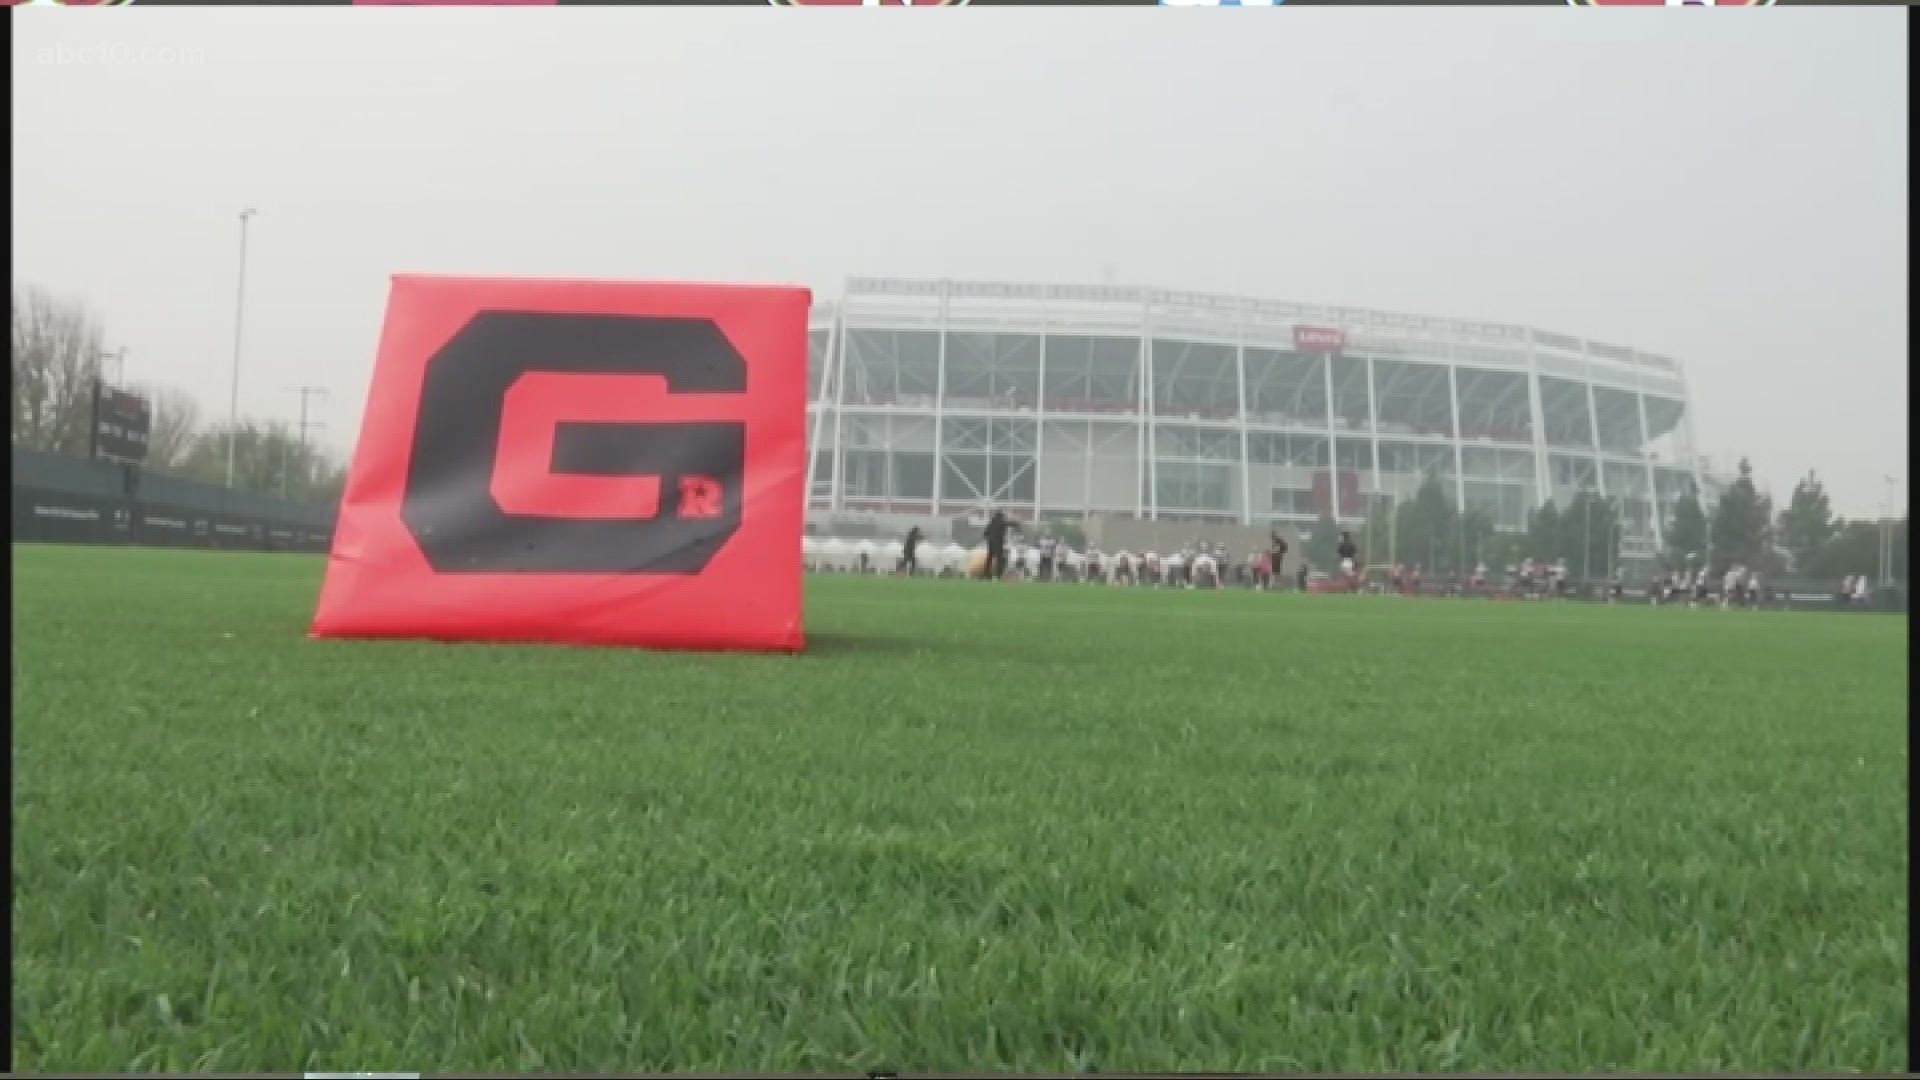 The San Francisco 49ers are hoping the poor air quality in the region doesn't impact their season opening game in Santa Clara on Sunday when they host the Cardinals.